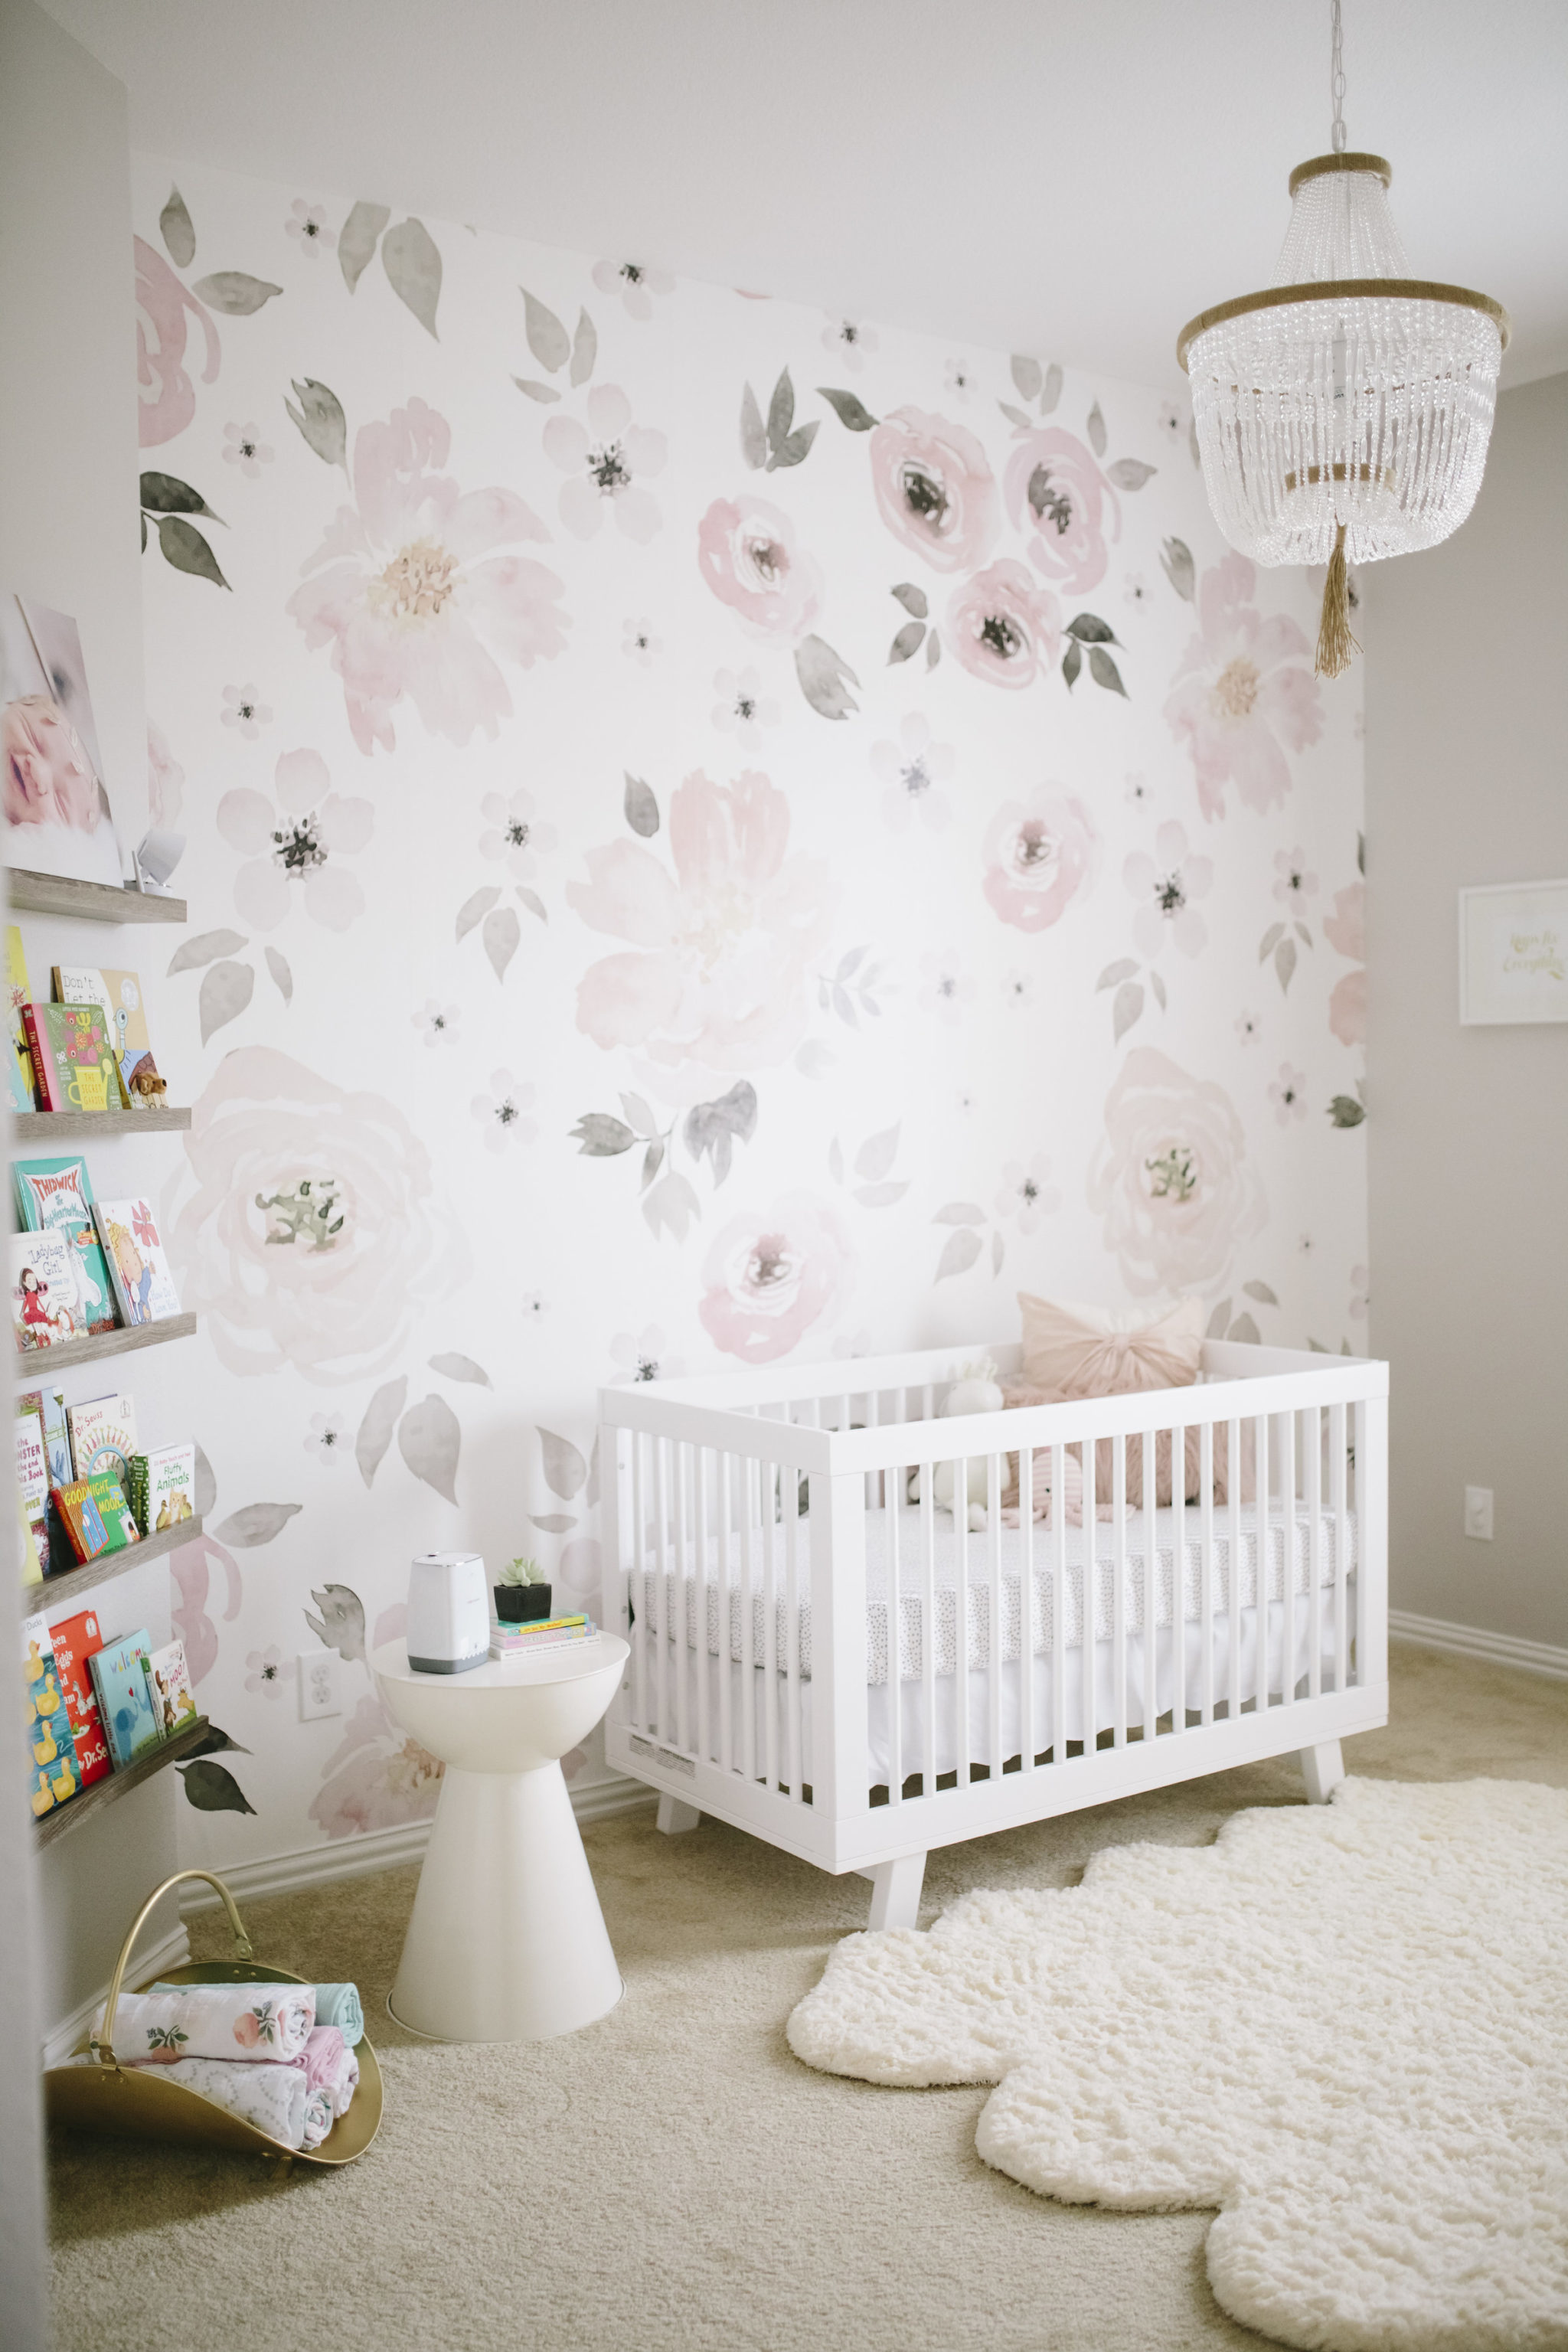 Floral Wallpaper in Pink and Gray Nursery